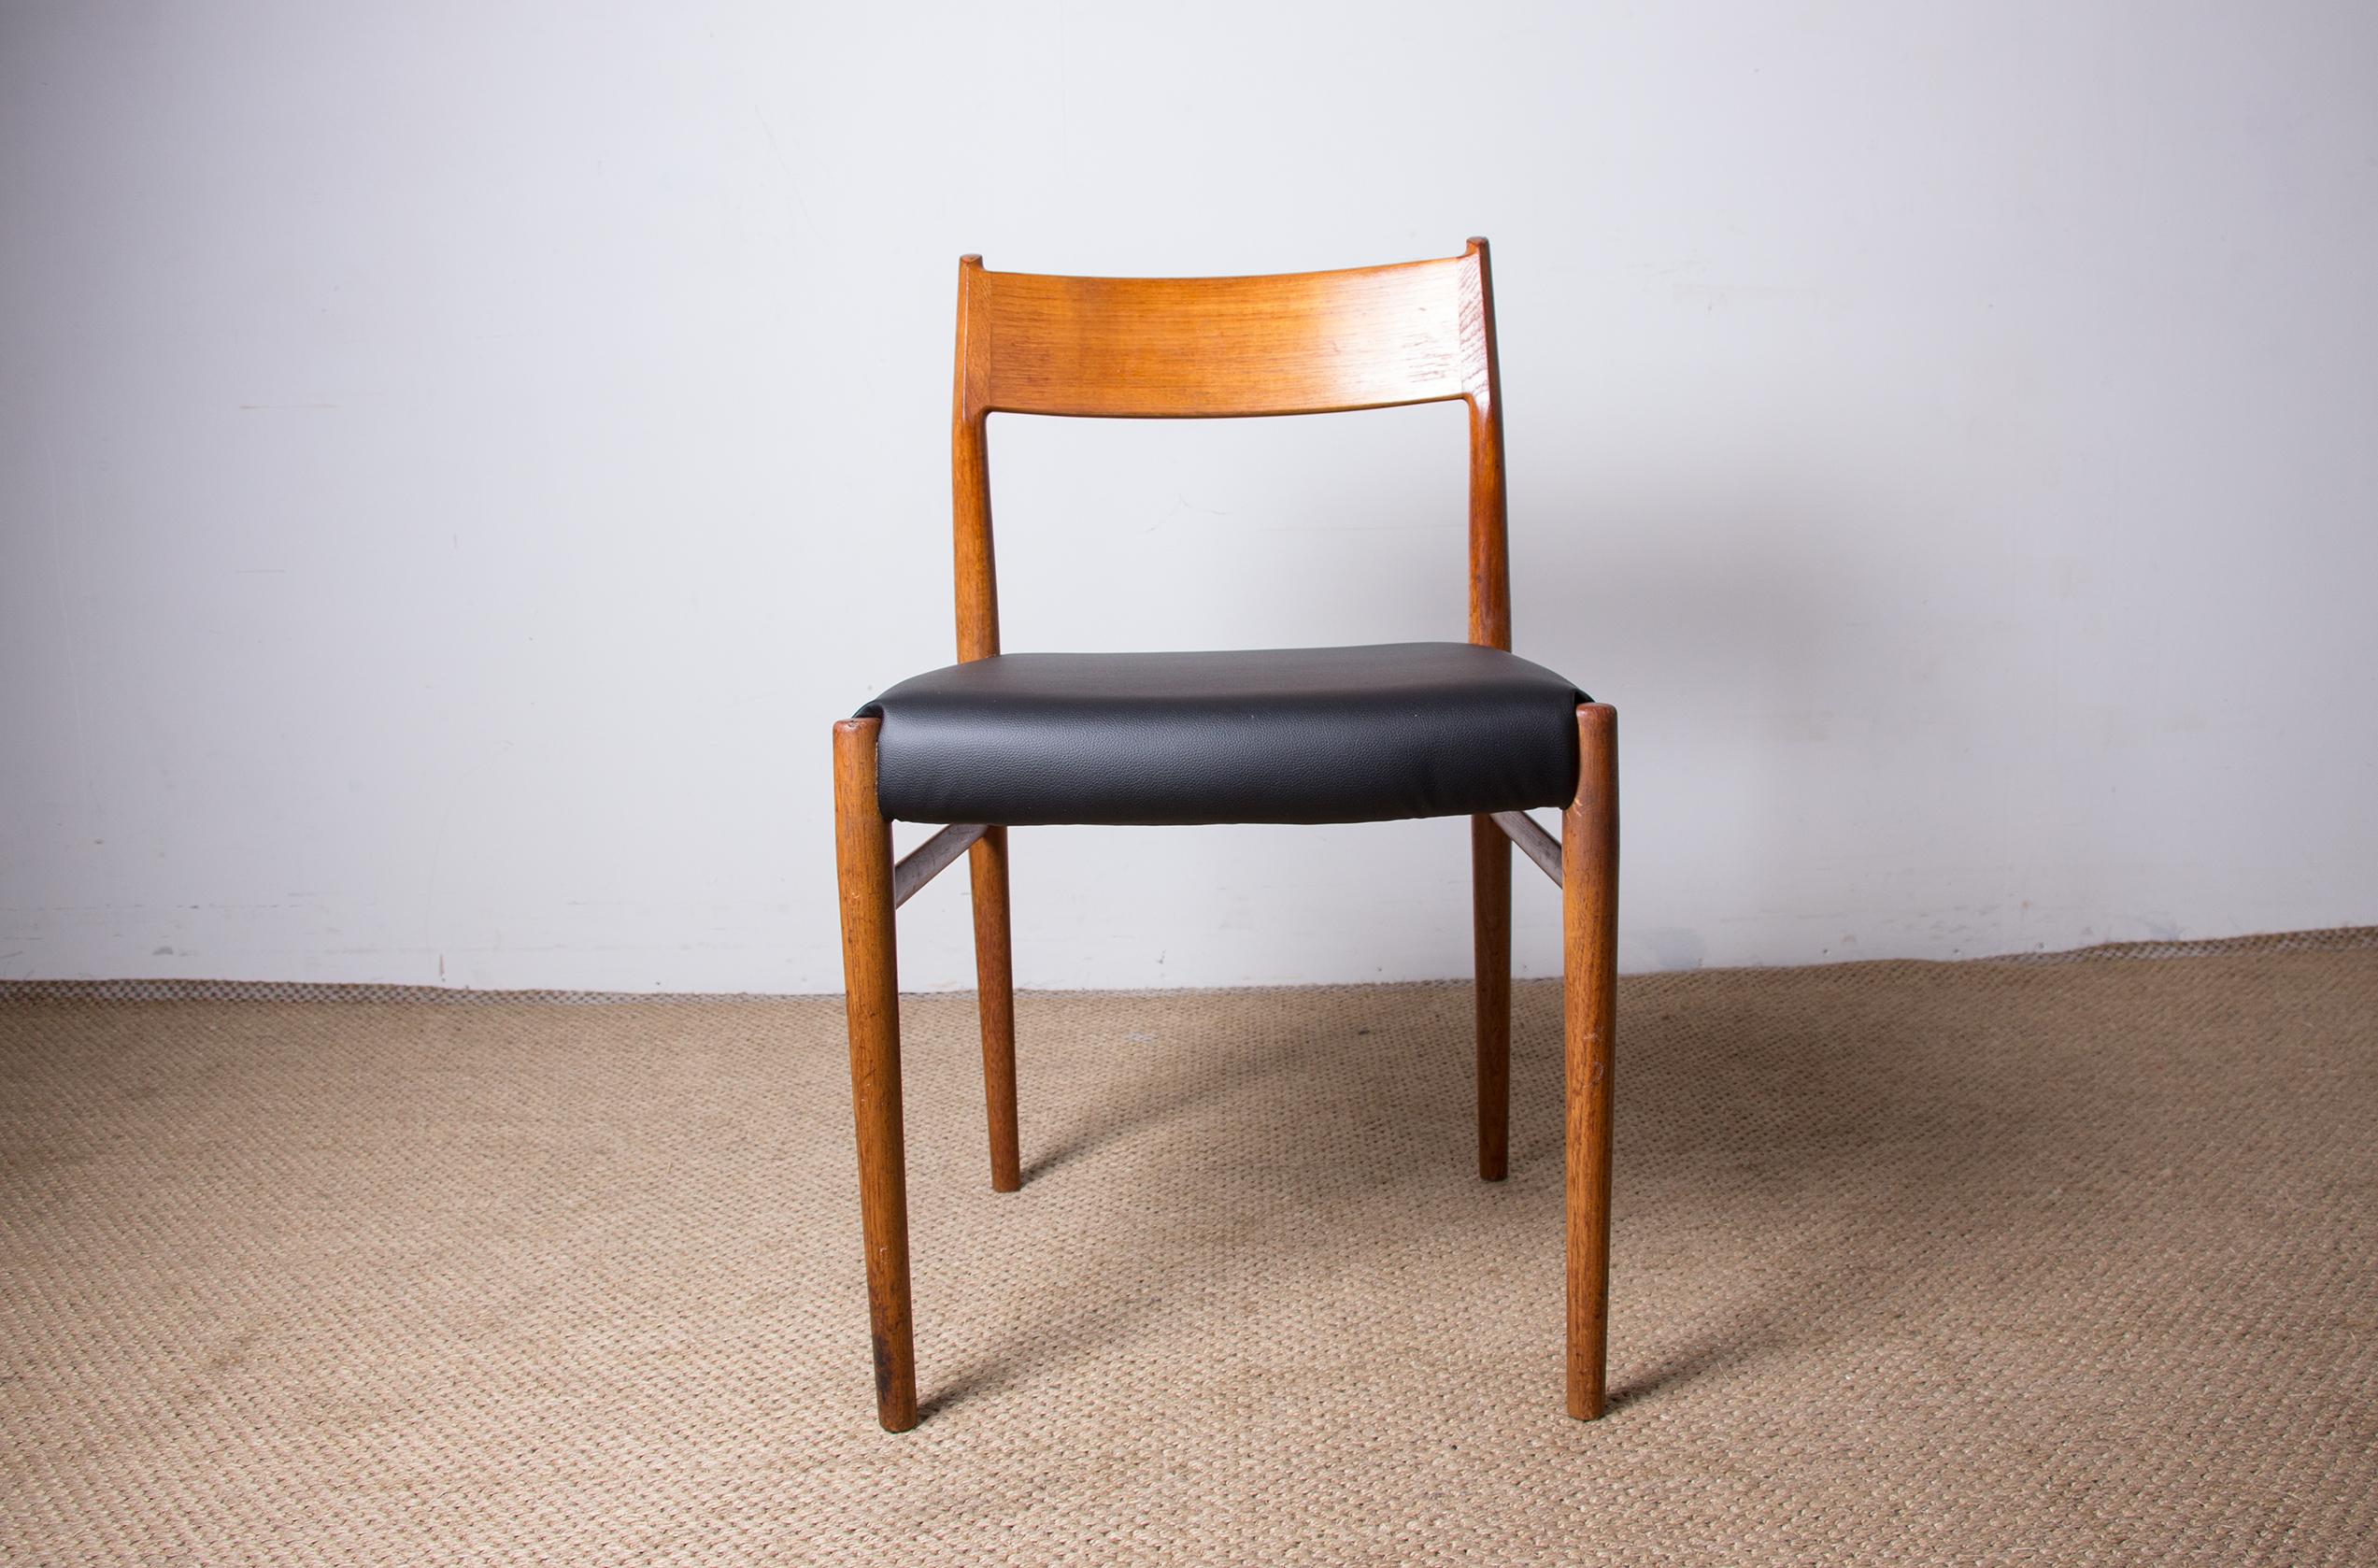 Very beautiful Scandinavian dining room chairs. The completely redone seats (straps; foam and fabric) offer great comfort. Sober and very elegant design. Superb manufacturing quality for these beautifully crafted chairs.